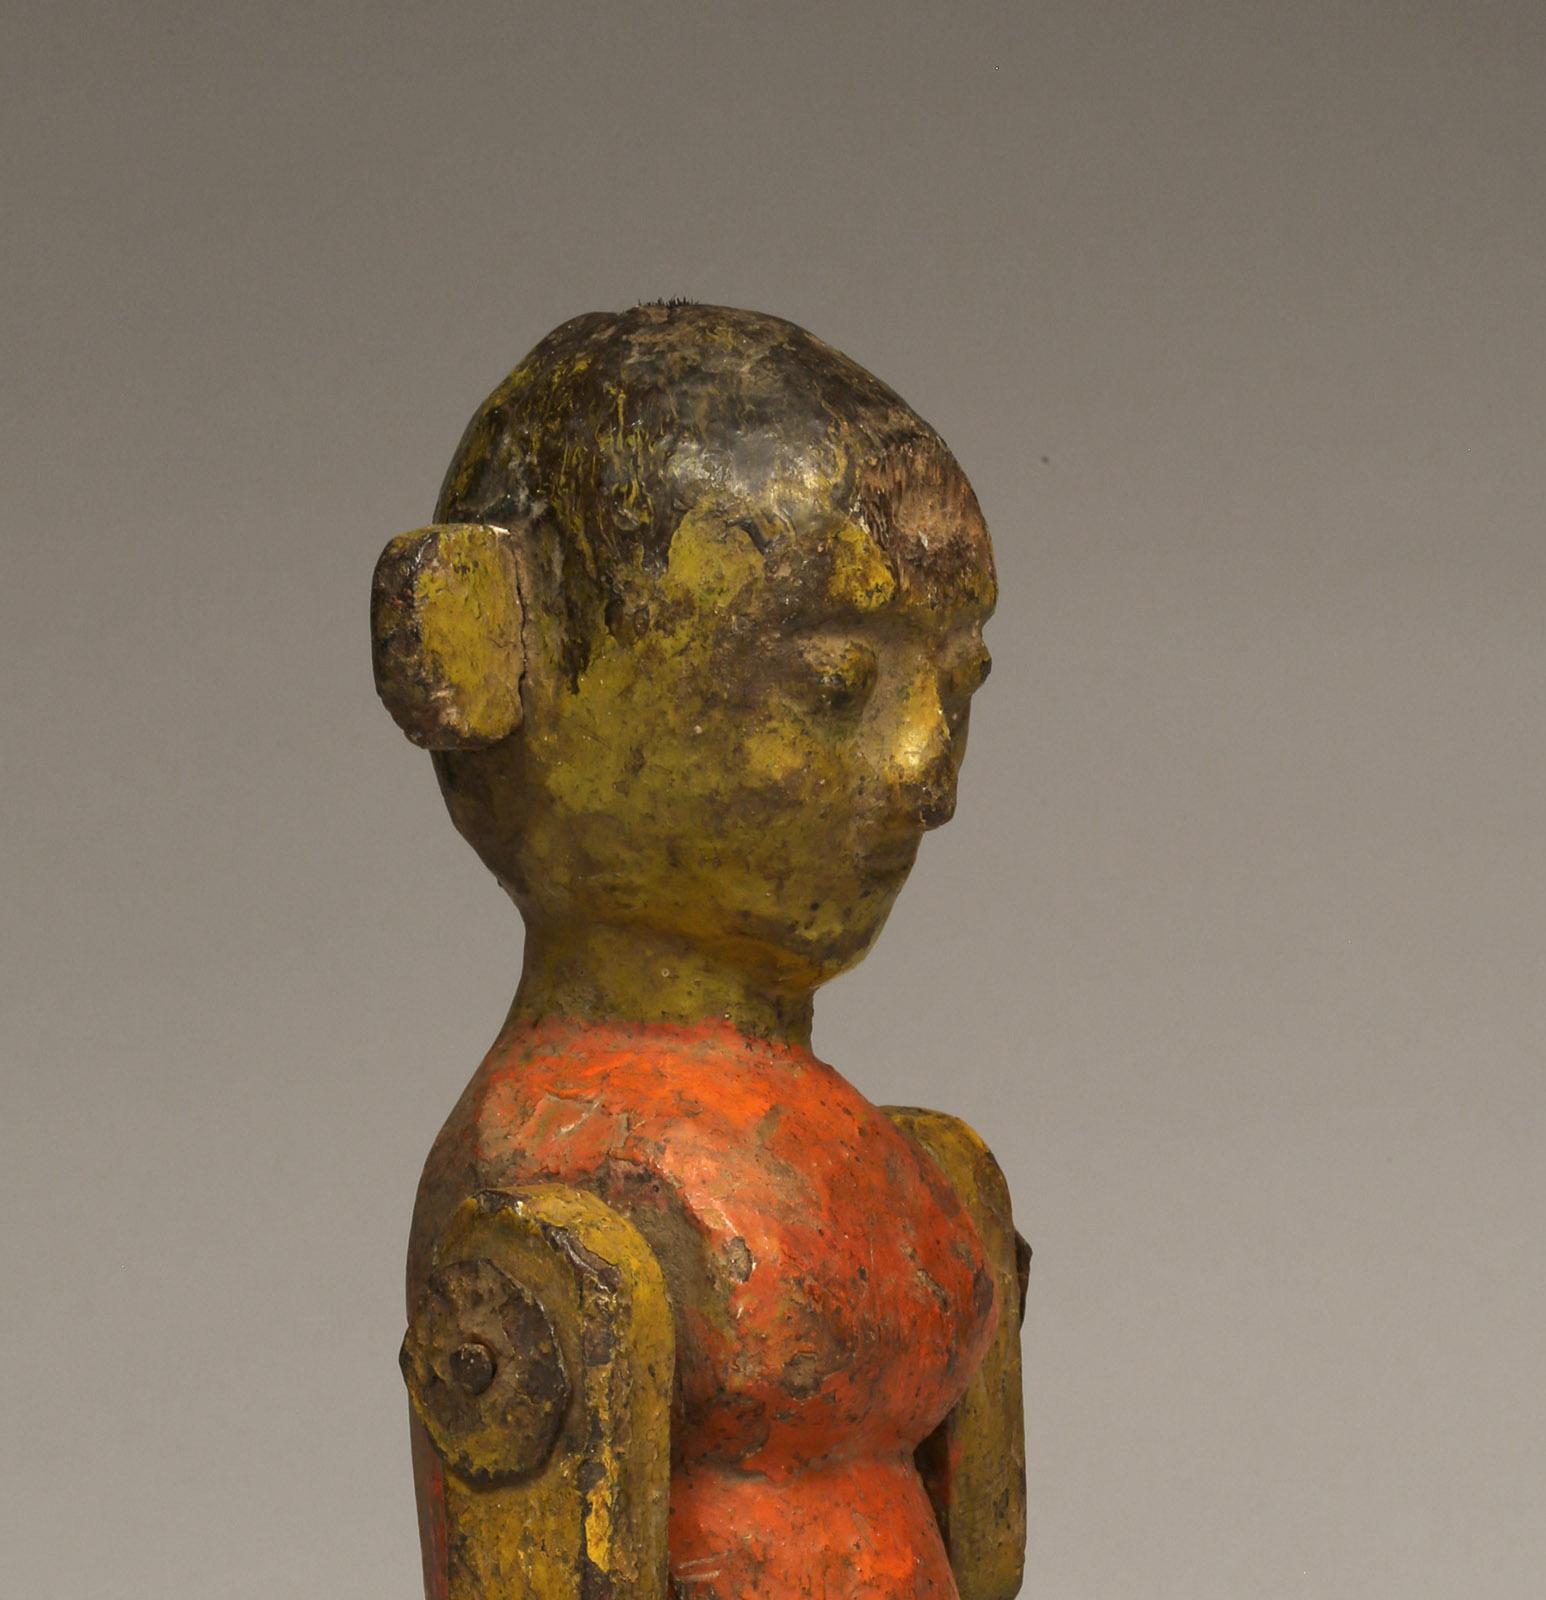 Hand-Painted Wooden Child's Toy from South India, Circa 1920